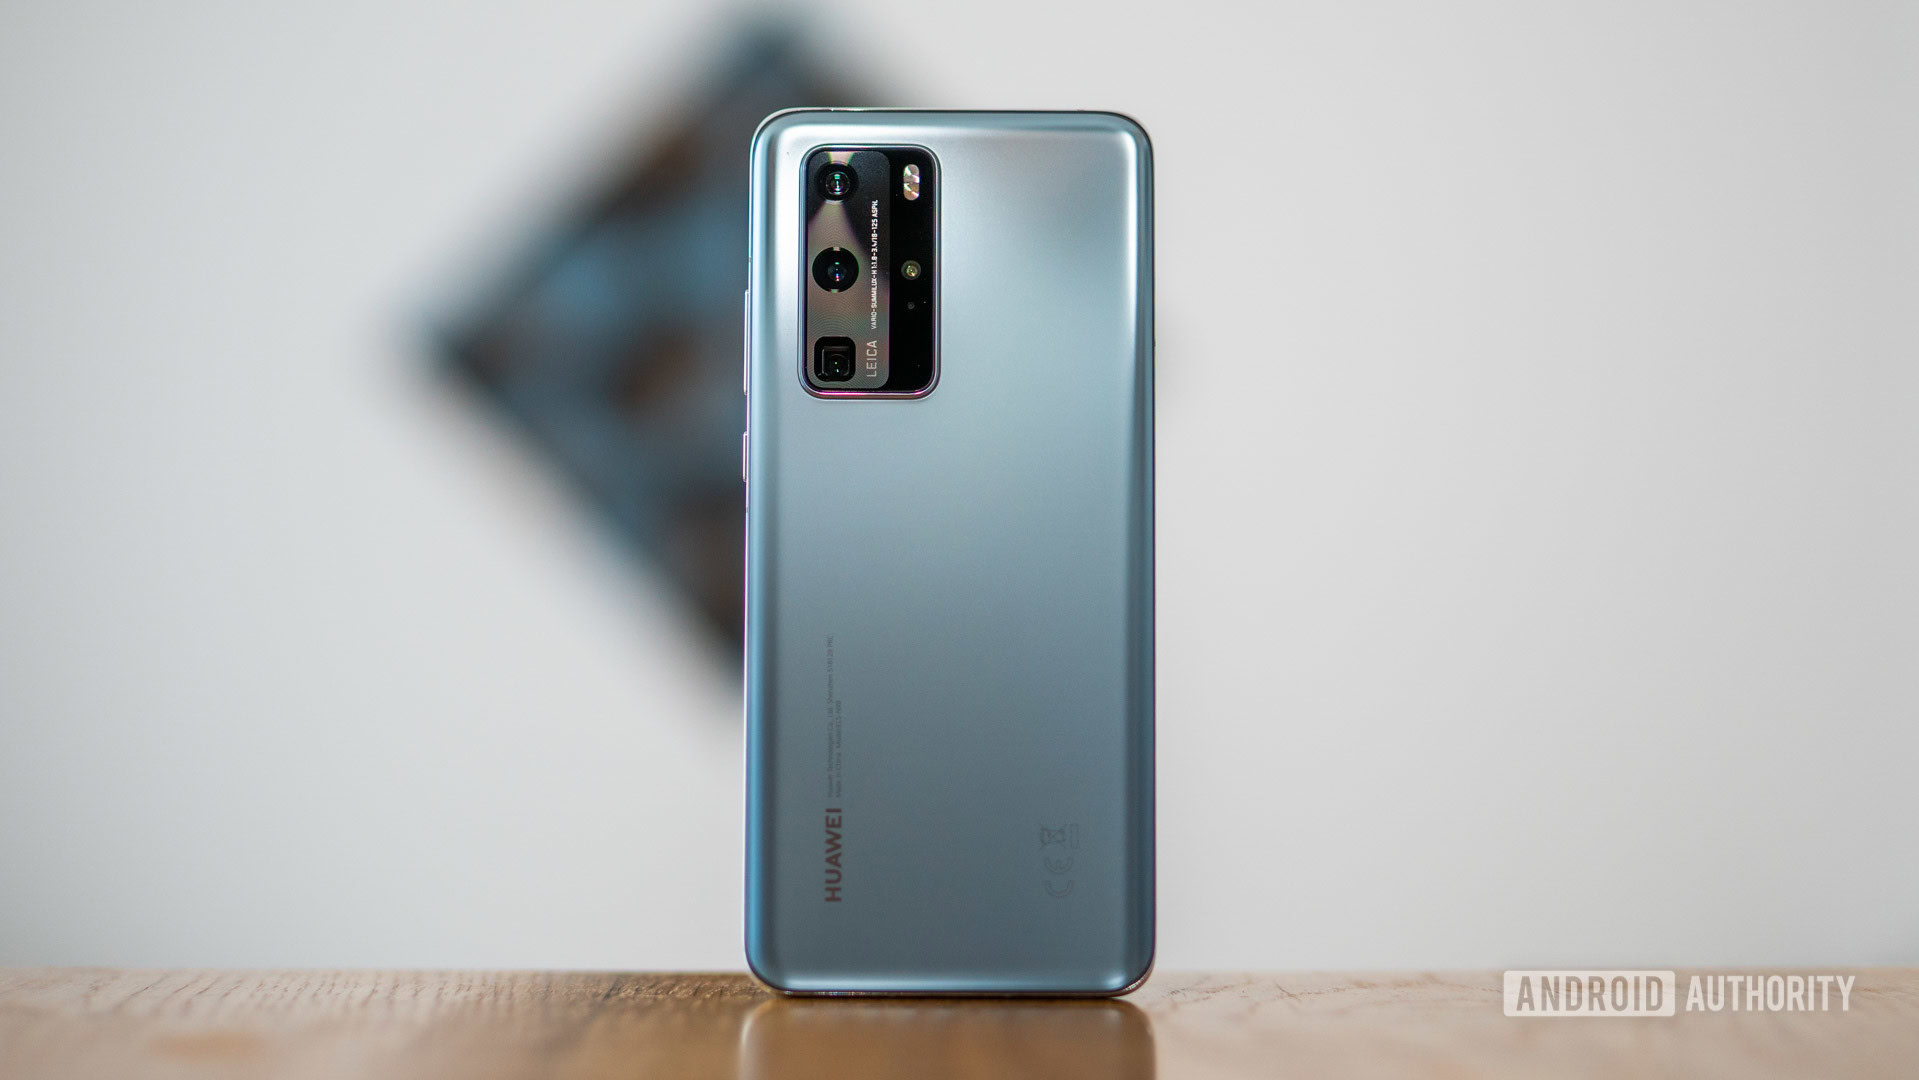 The new HUAWEI P40 Pro: Here are its seven cool features you need